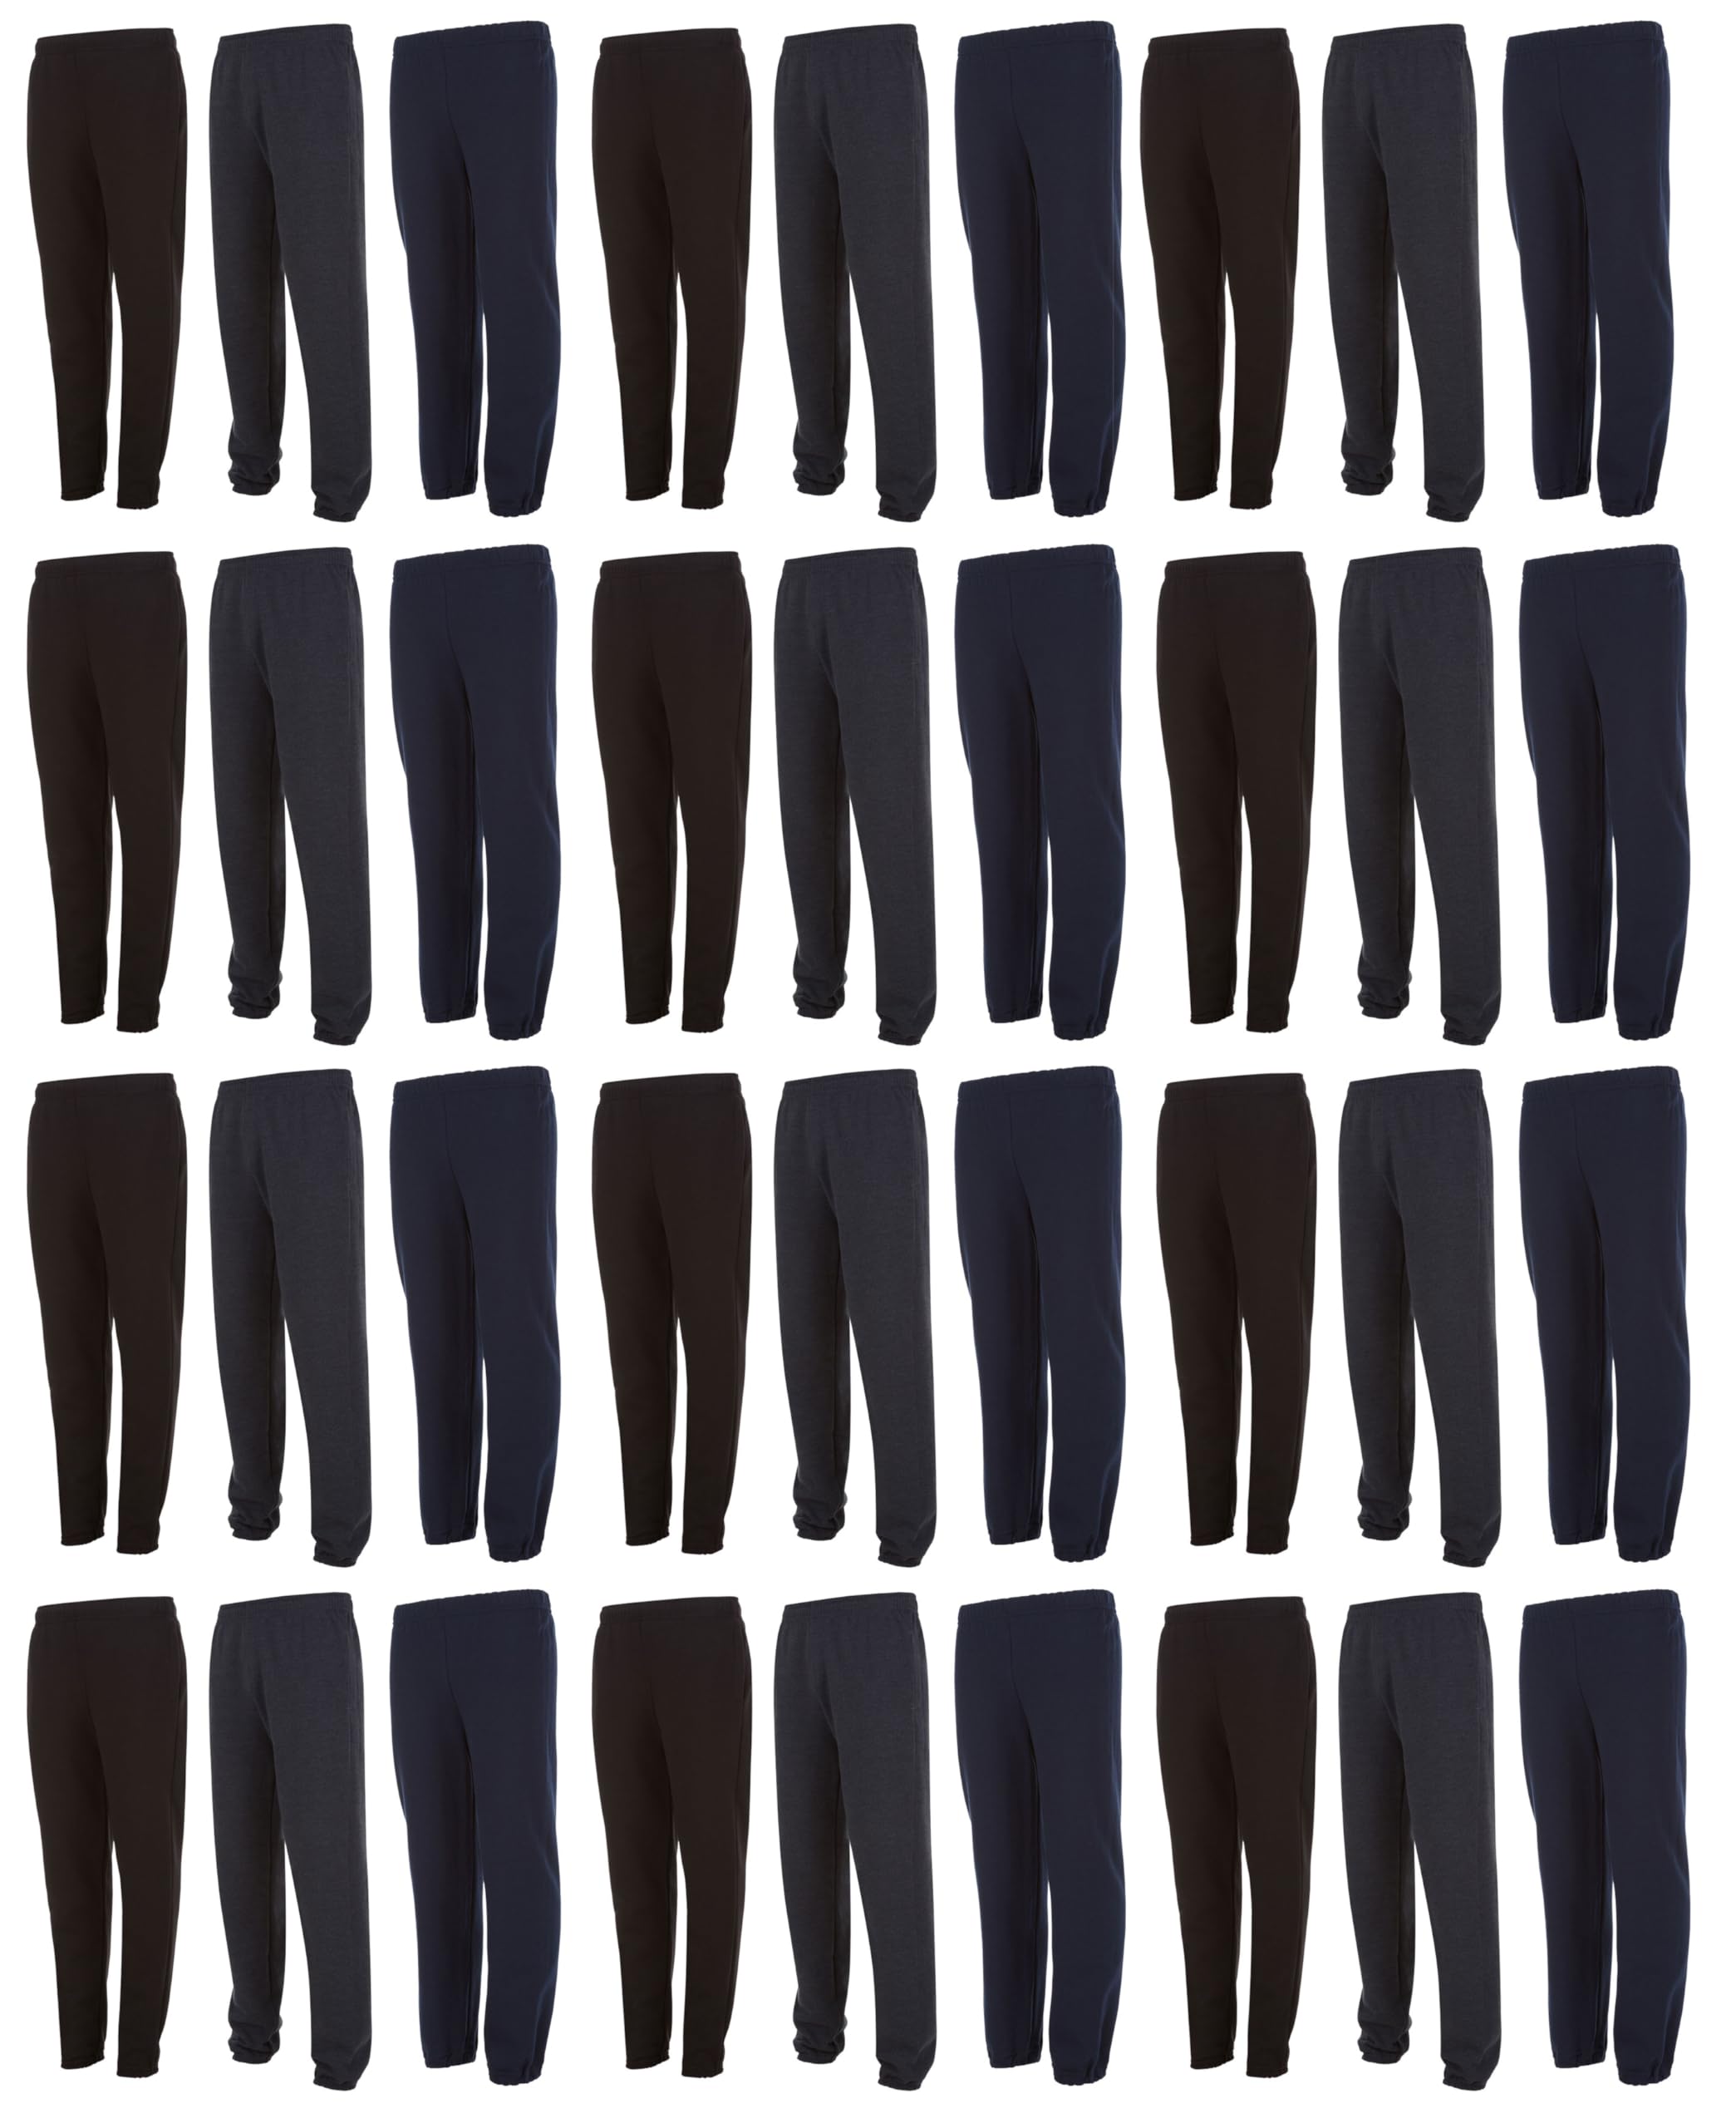 Yacht & Smith 36 Pack of Wholesale Childrens Unisex Jogger Bulk Sweatpants, Black Navy Gray, Comfy Lounge Joggers for Kids